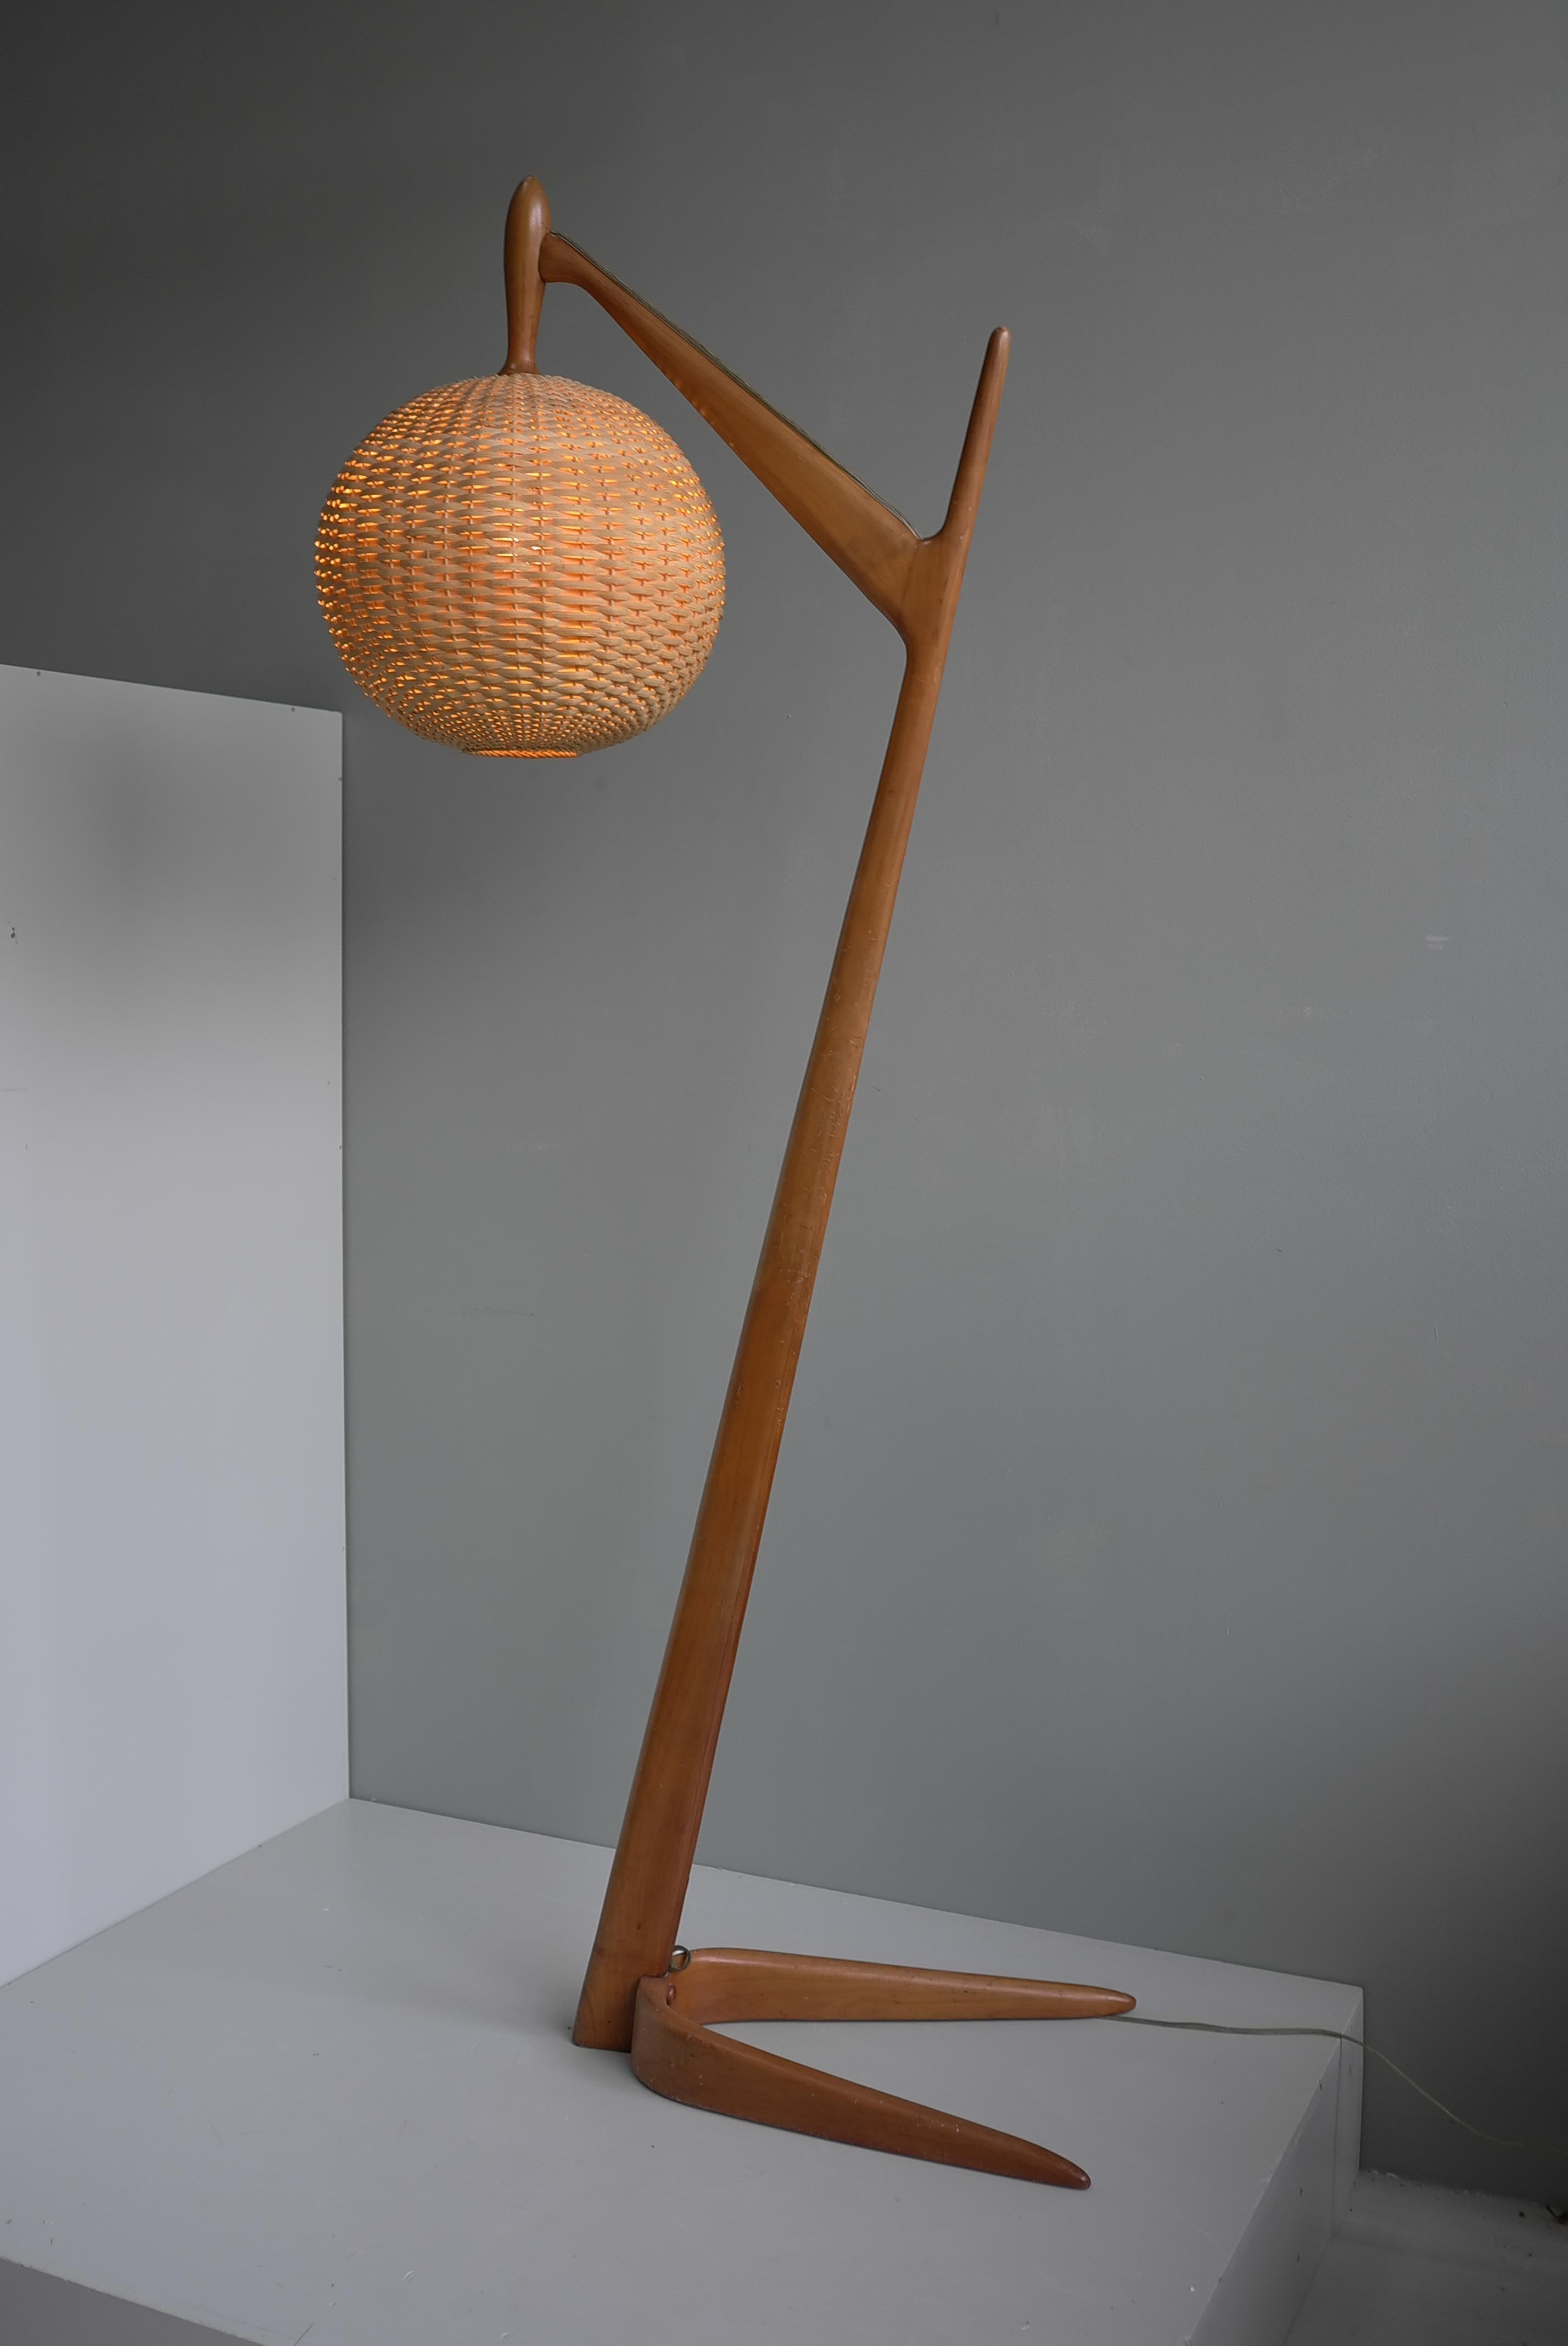 Large Organic Italian Floorlamp in Cedar Wood with Wicker Lampshade, circa 1955 In Good Condition For Sale In Den Haag, NL